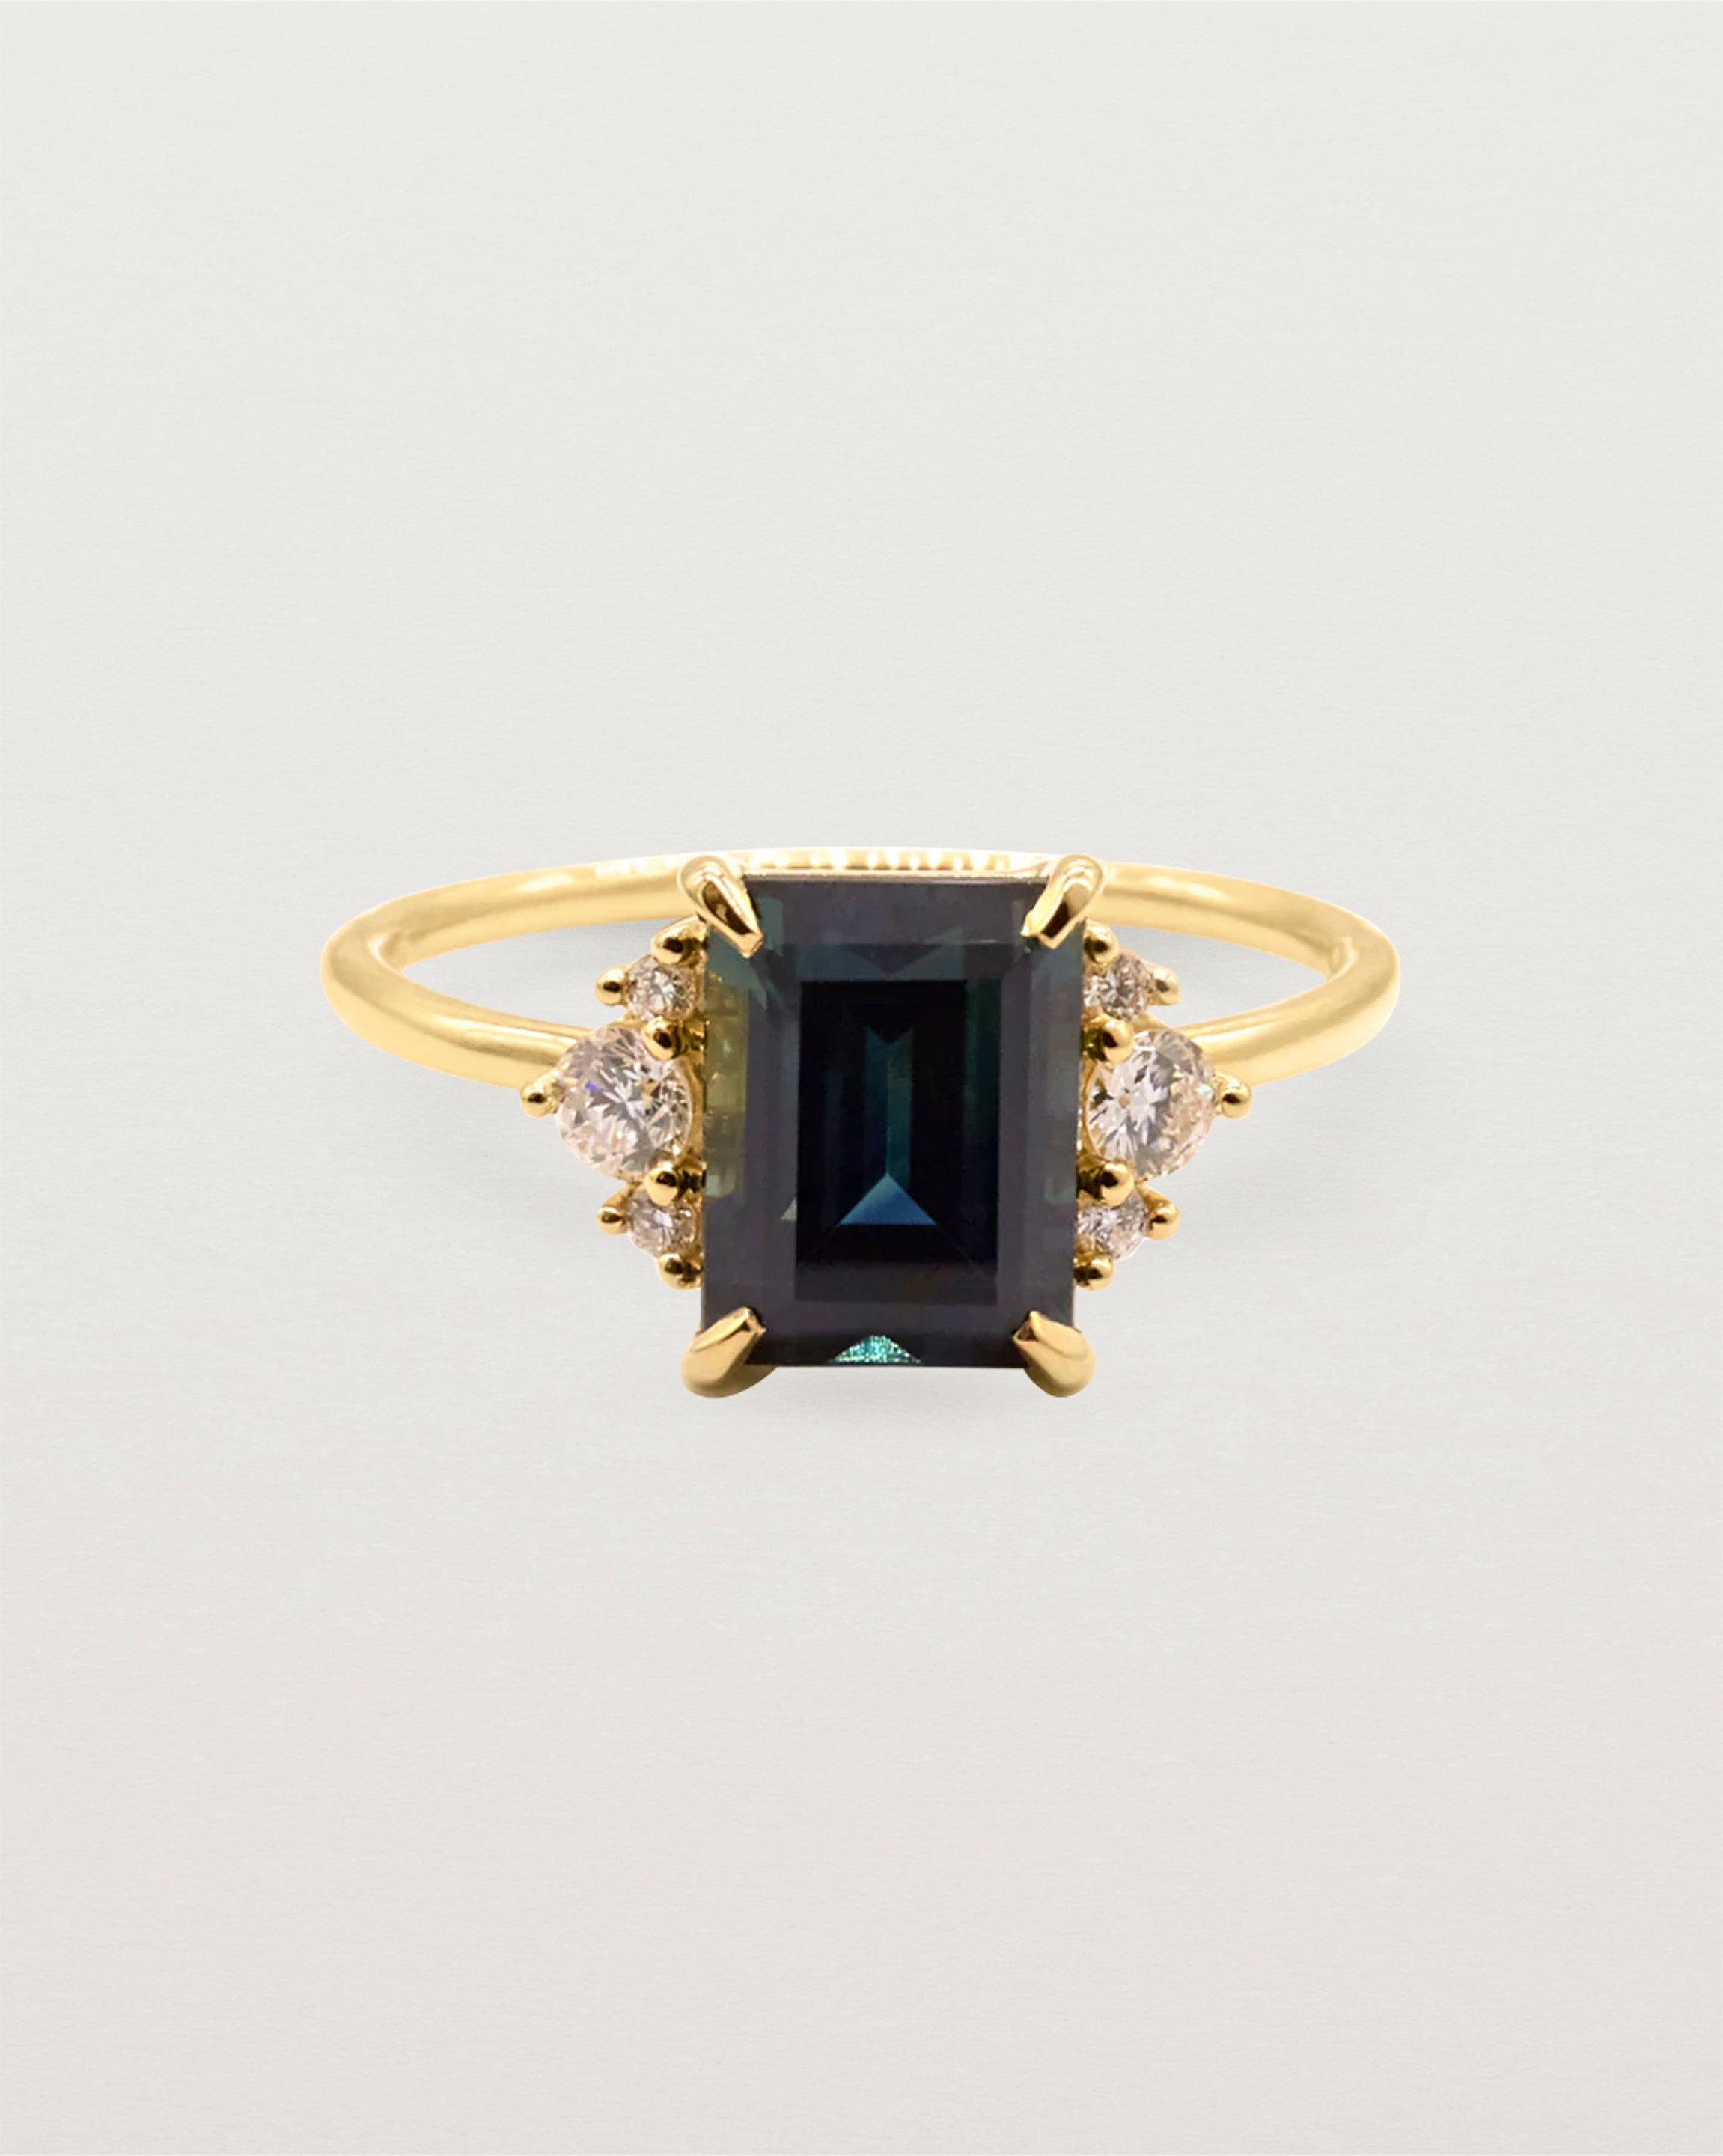 A stunning blue/green emerald cut parti sapphire set amongst a delicate trio cluster of round white diamonds. Featuring a round band and intricate basket setting all in 18ct Yellow Gold.